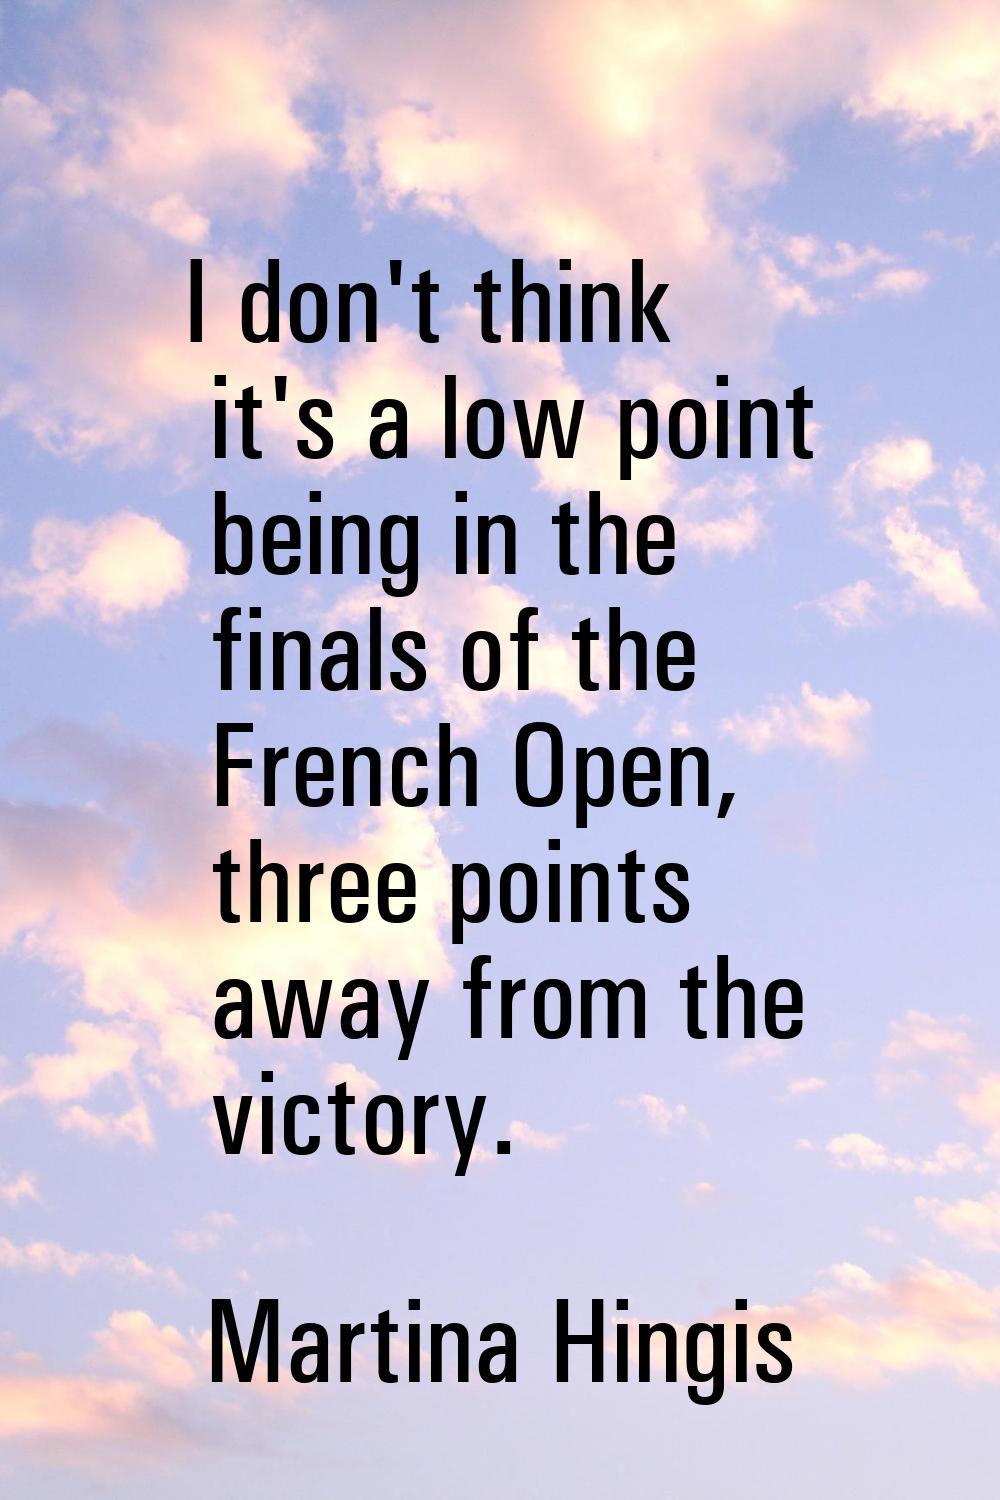 I don't think it's a low point being in the finals of the French Open, three points away from the v